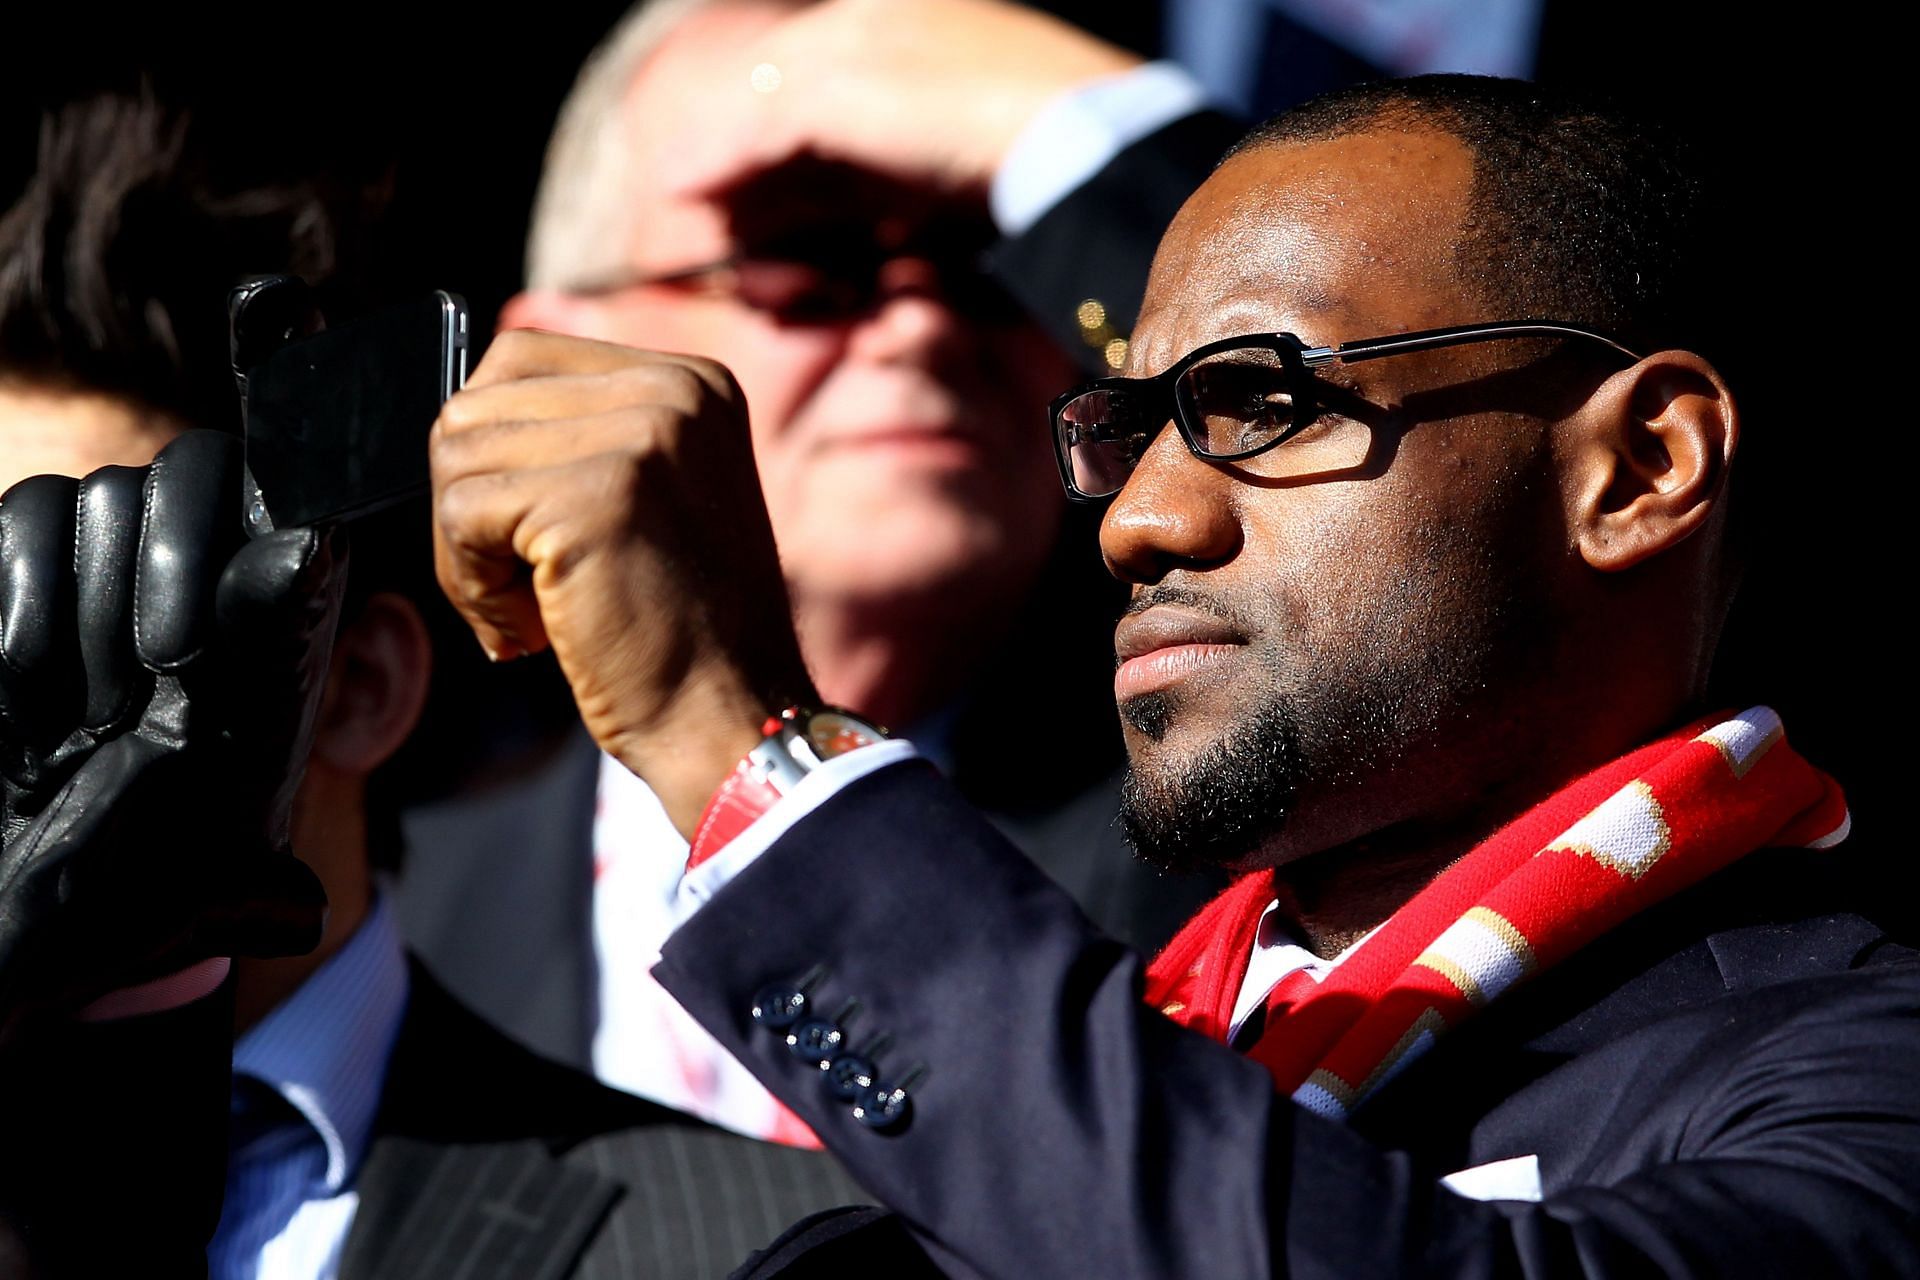 LeBron James watching Liverpool vs Manchester United